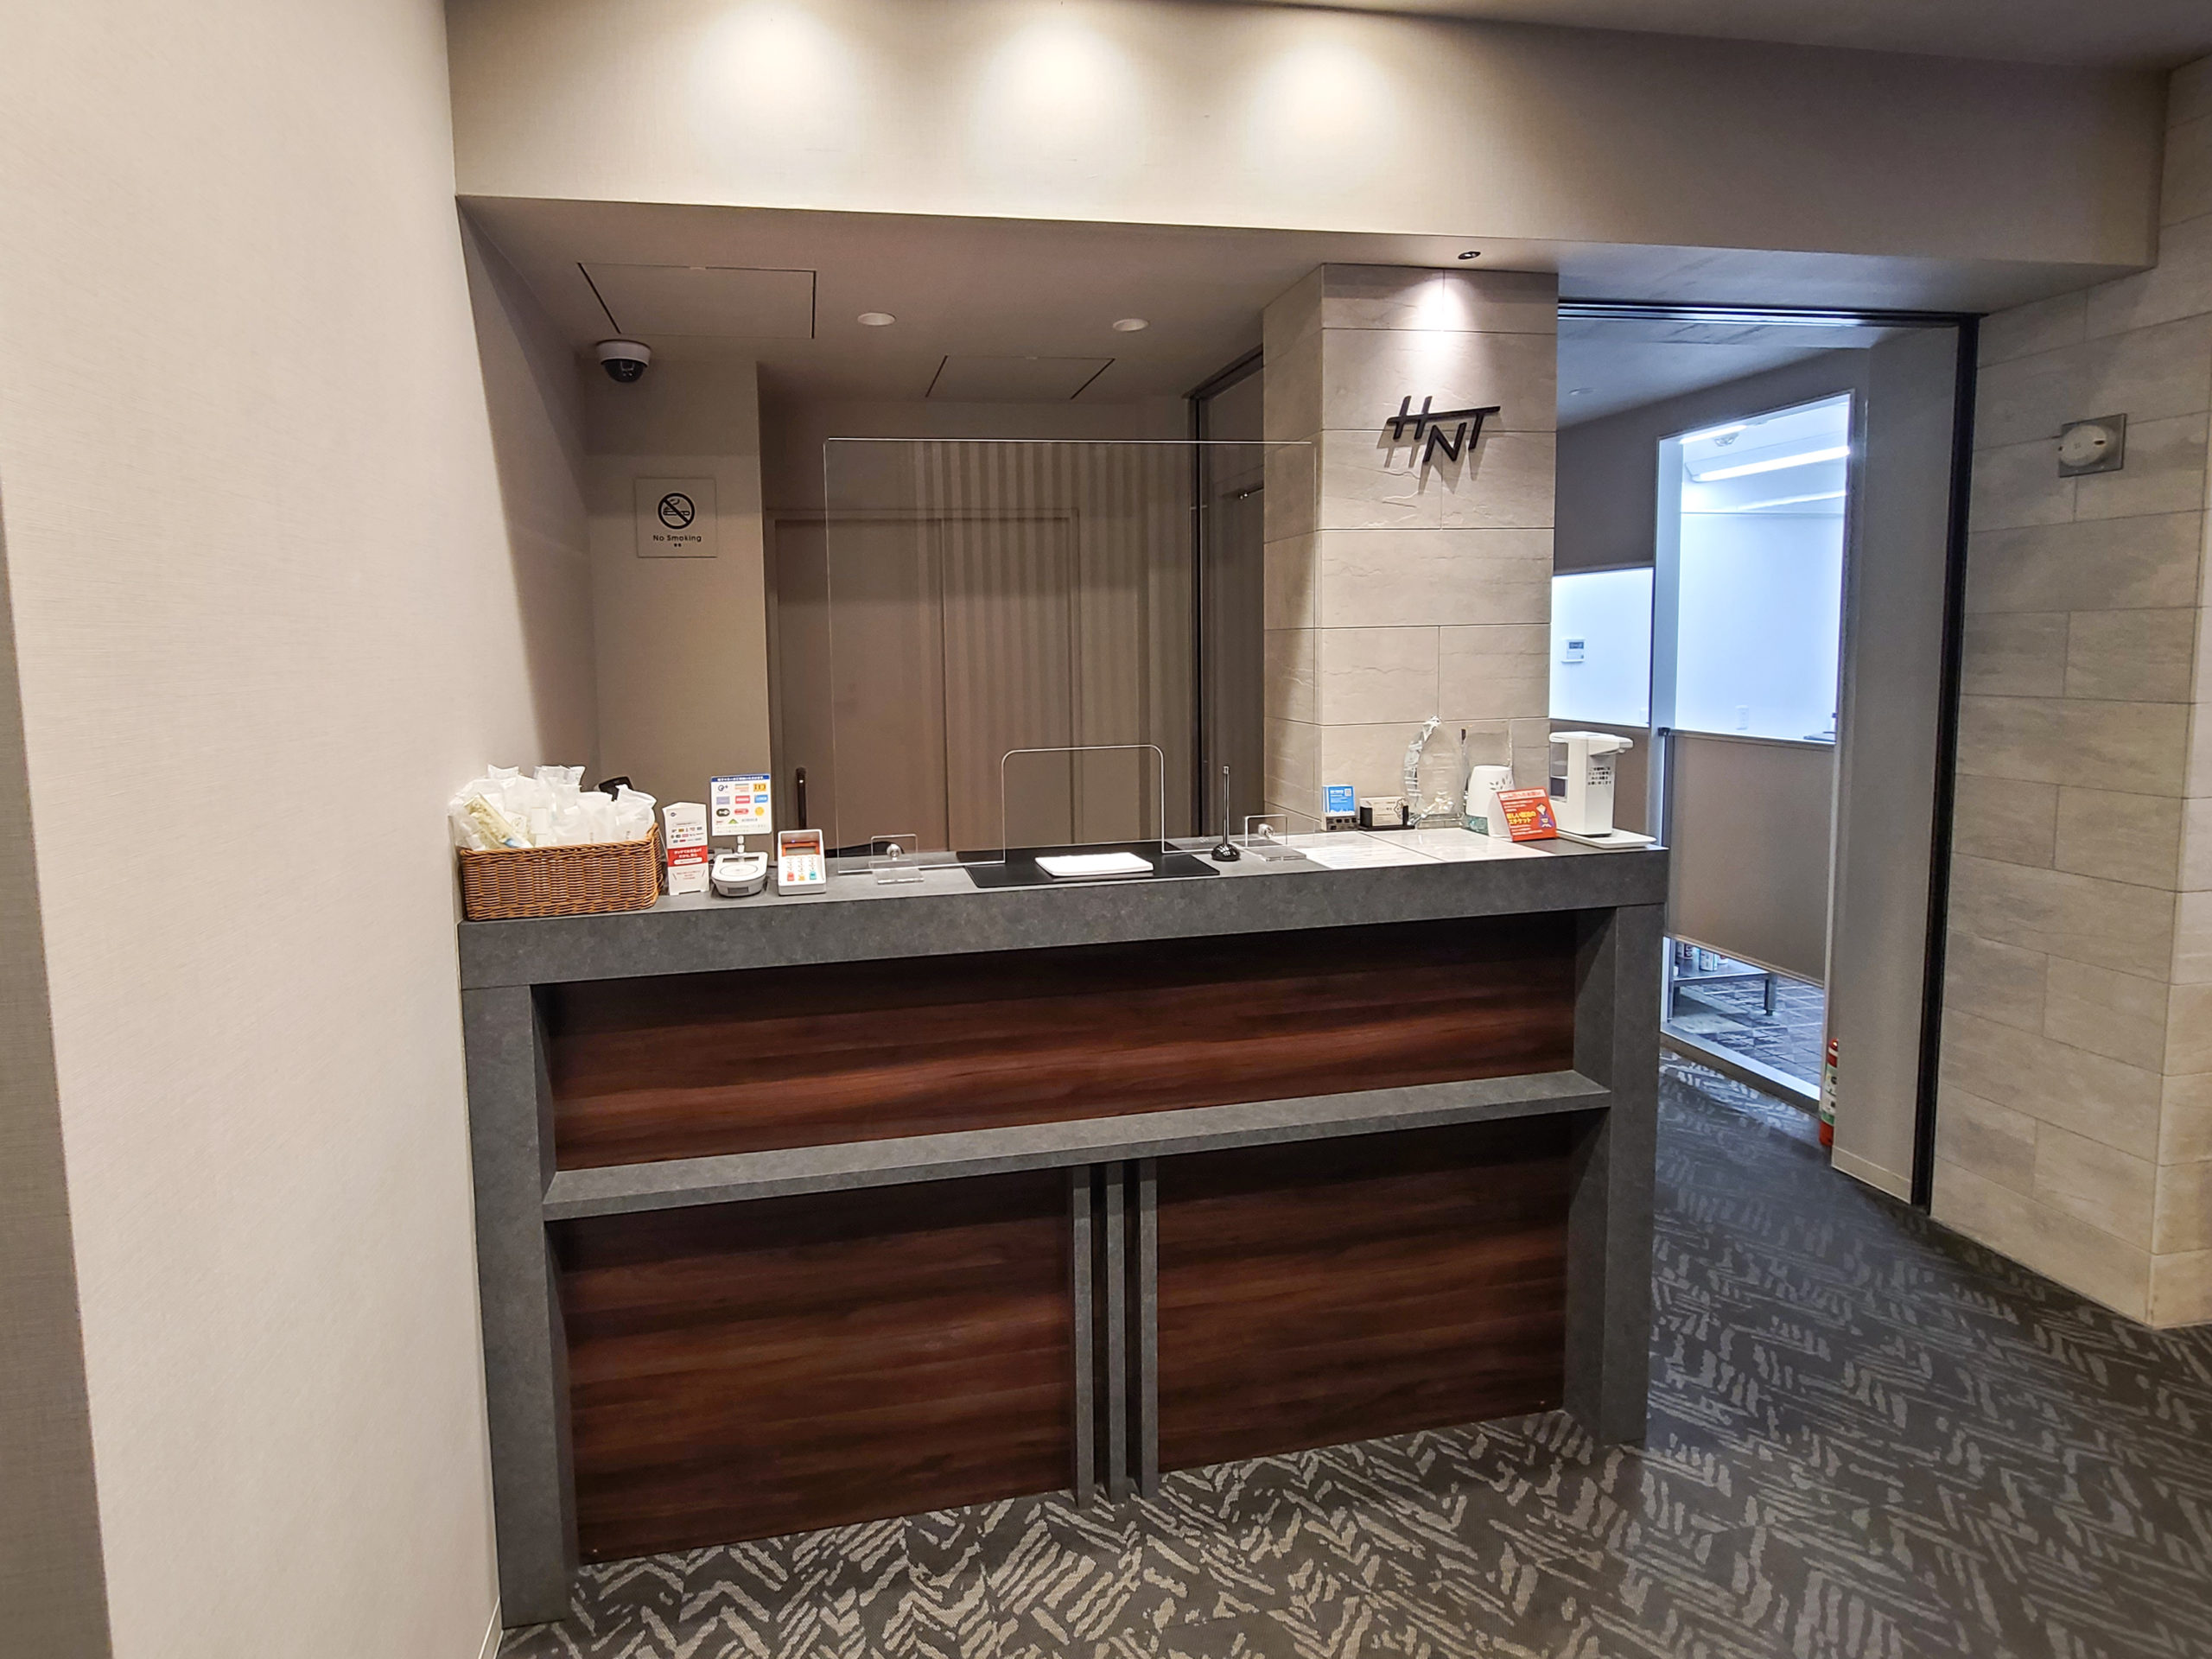 The hotel front desk